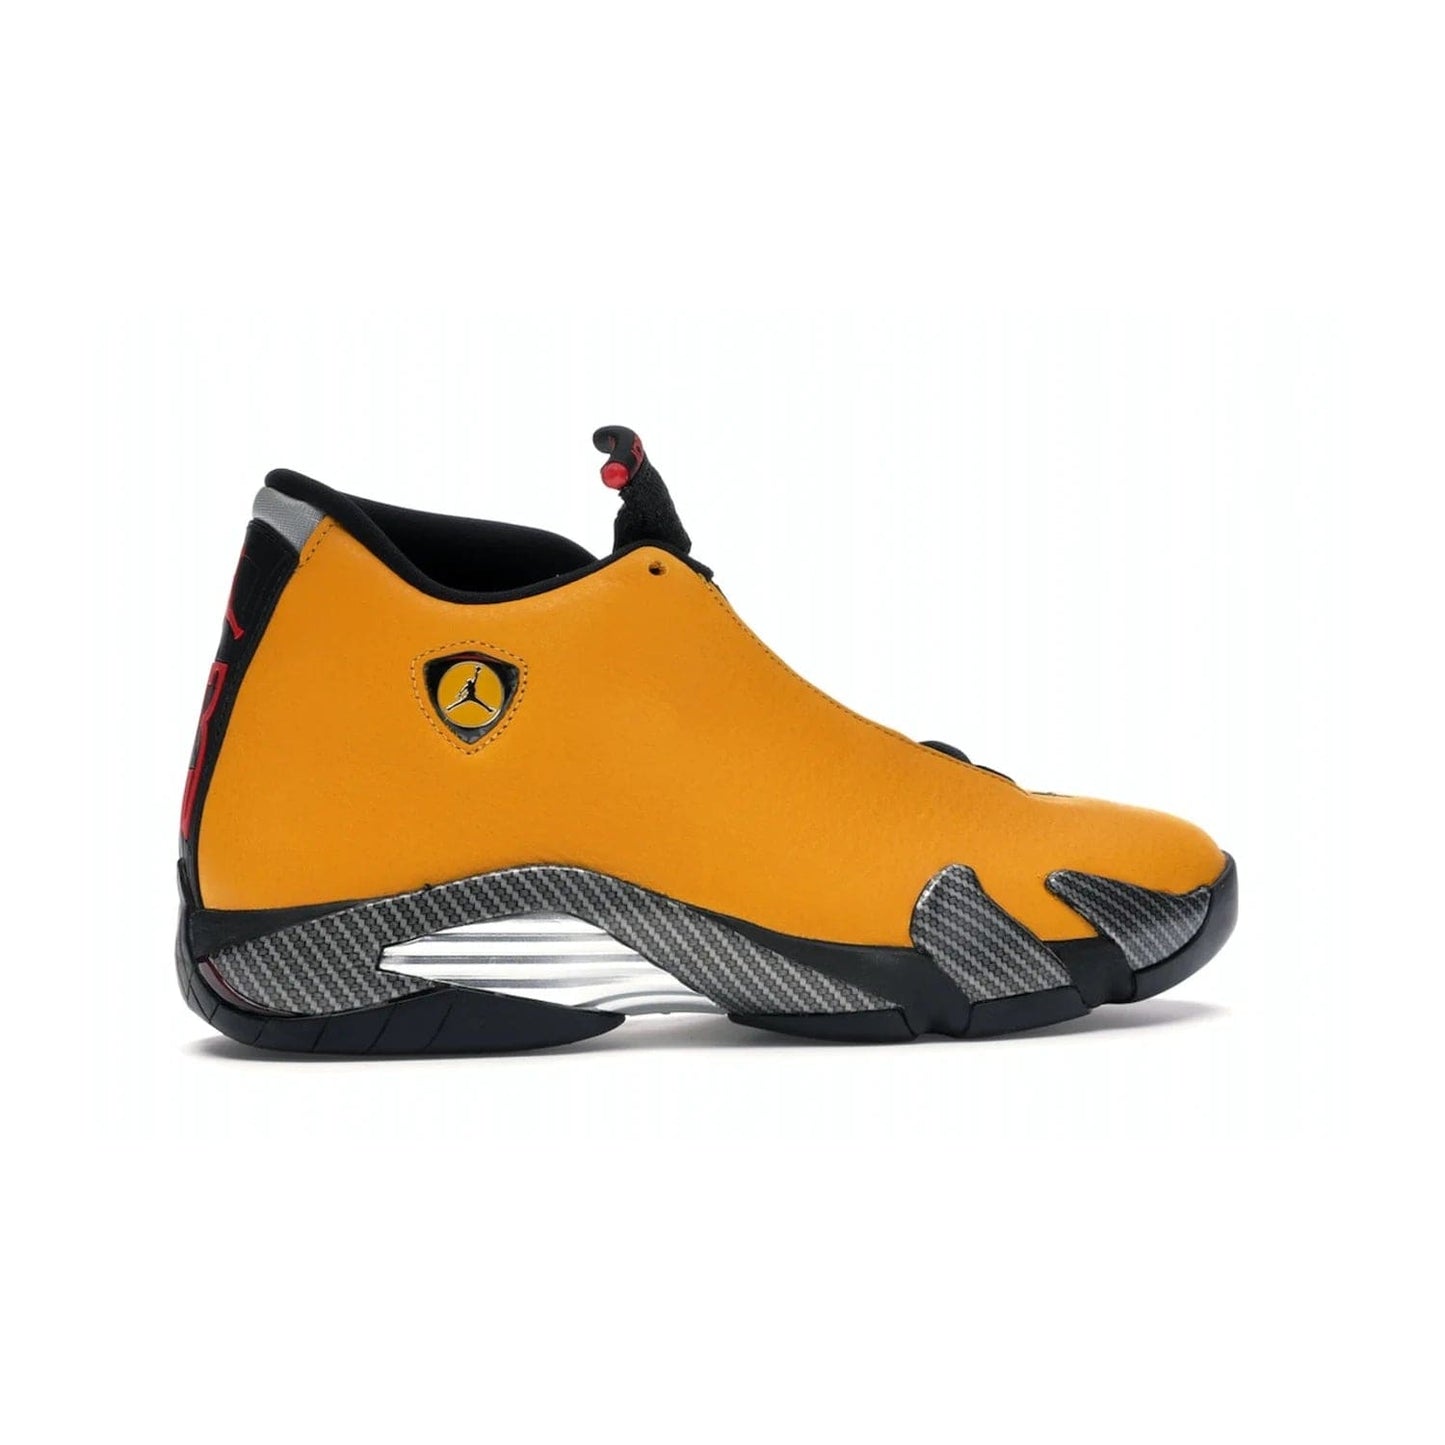 Jordan 14 Retro University Gold - Image 35 - Only at www.BallersClubKickz.com - Air Jordan 14 Retro University Gold: High-quality leather sneaker with Jumpman, tongue & heel logos. Zoom Air units & herringbone traction for superior comfort. University Gold outsole for stylish streetwear.